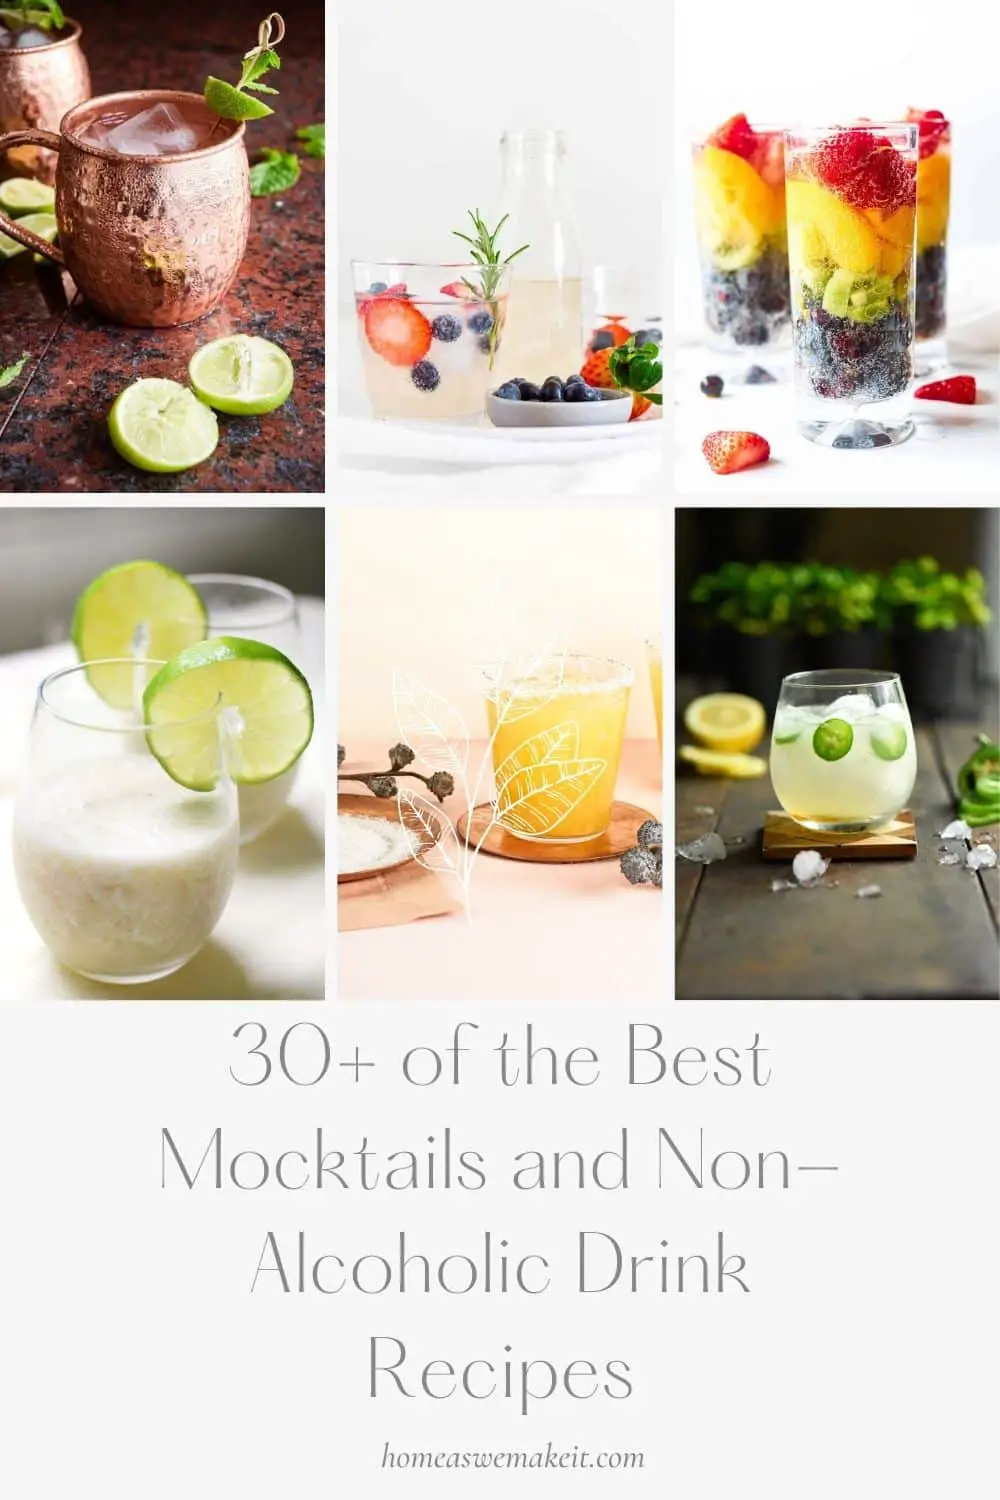 over 30 ideas for mocktail and non-alcoholic drink recipes recipes